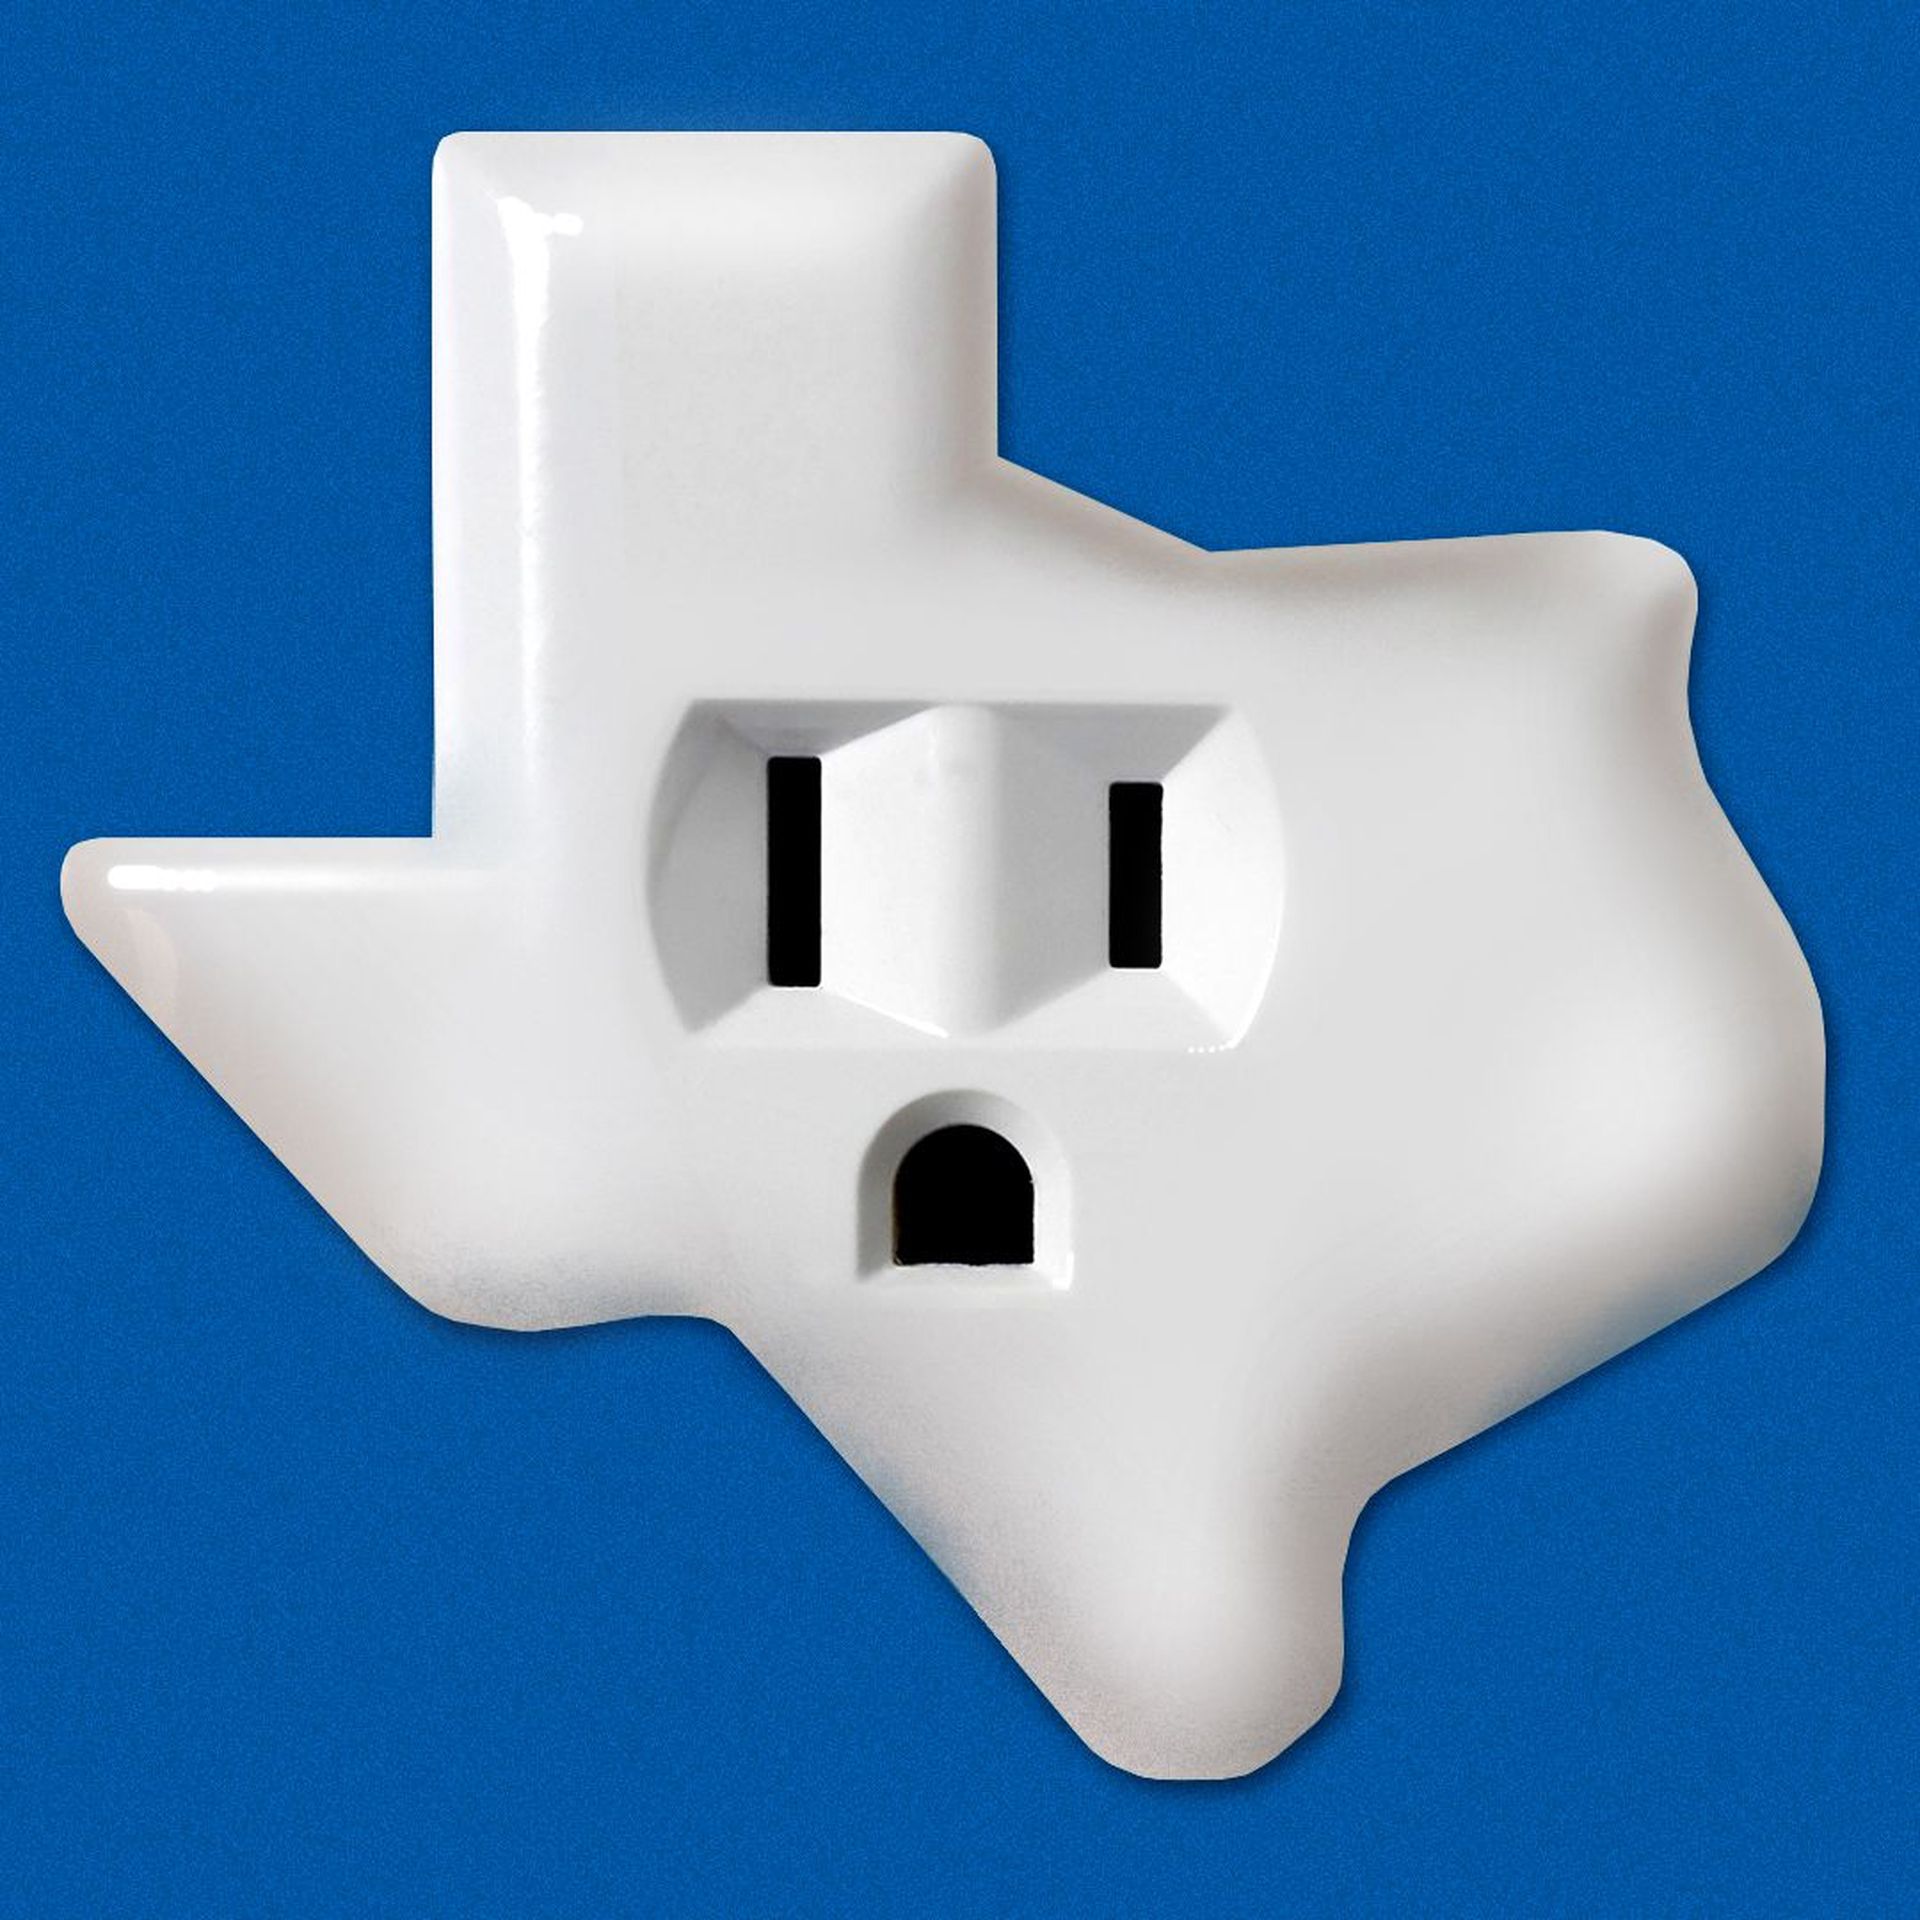 Illustration of a Texas-shaped power outlet